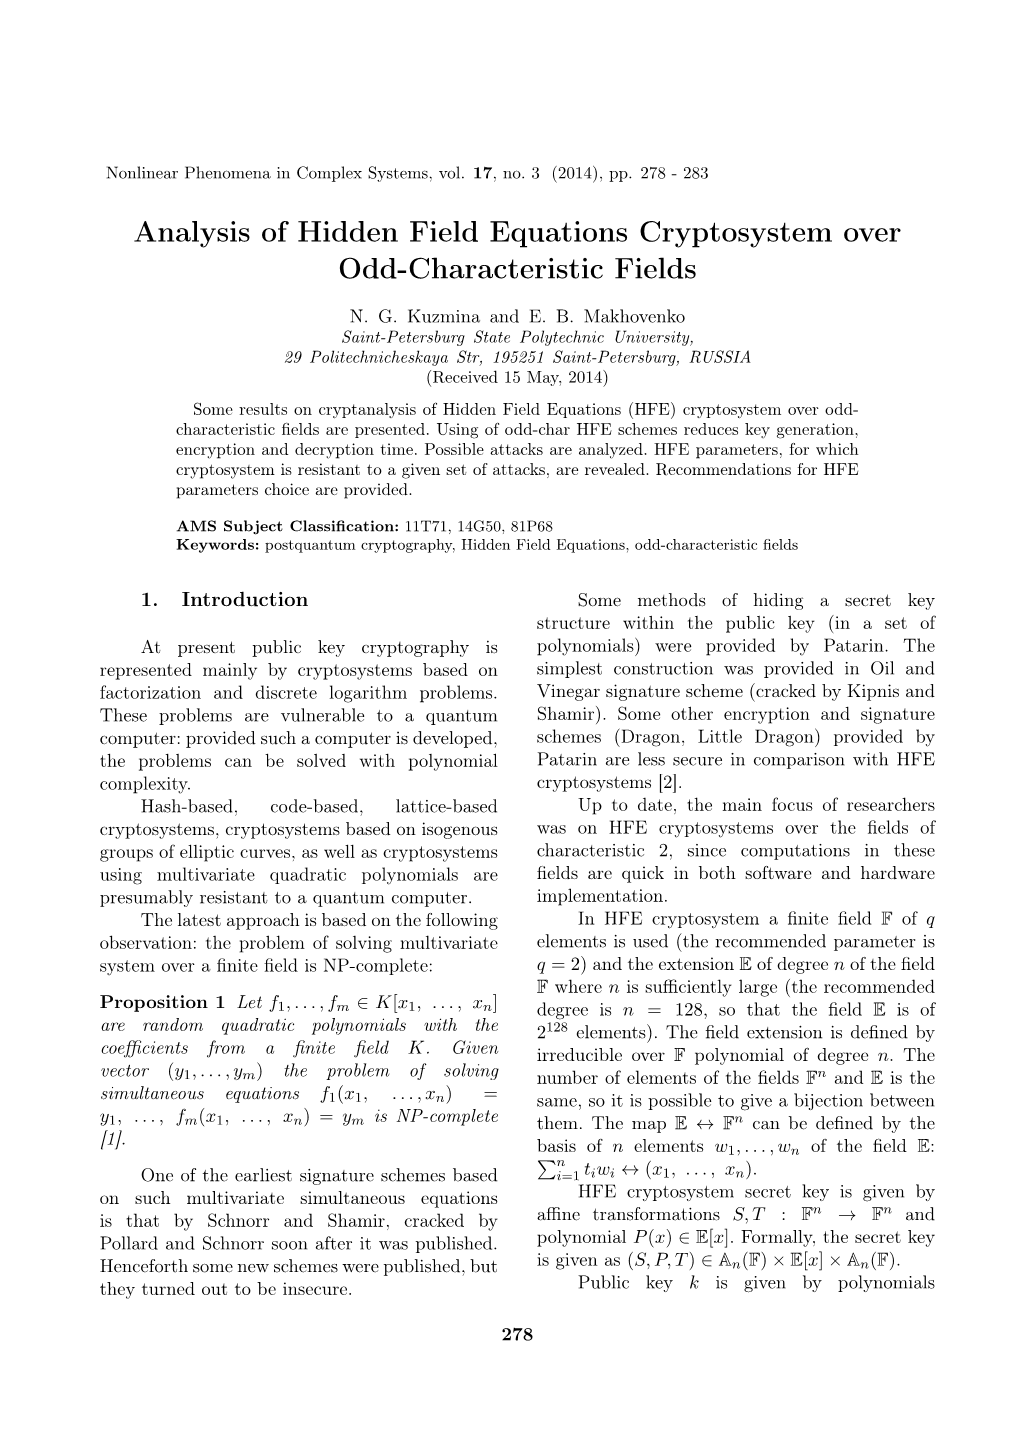 Analysis of Hidden Field Equations Cryptosystem Over Odd-Characteristic Fields